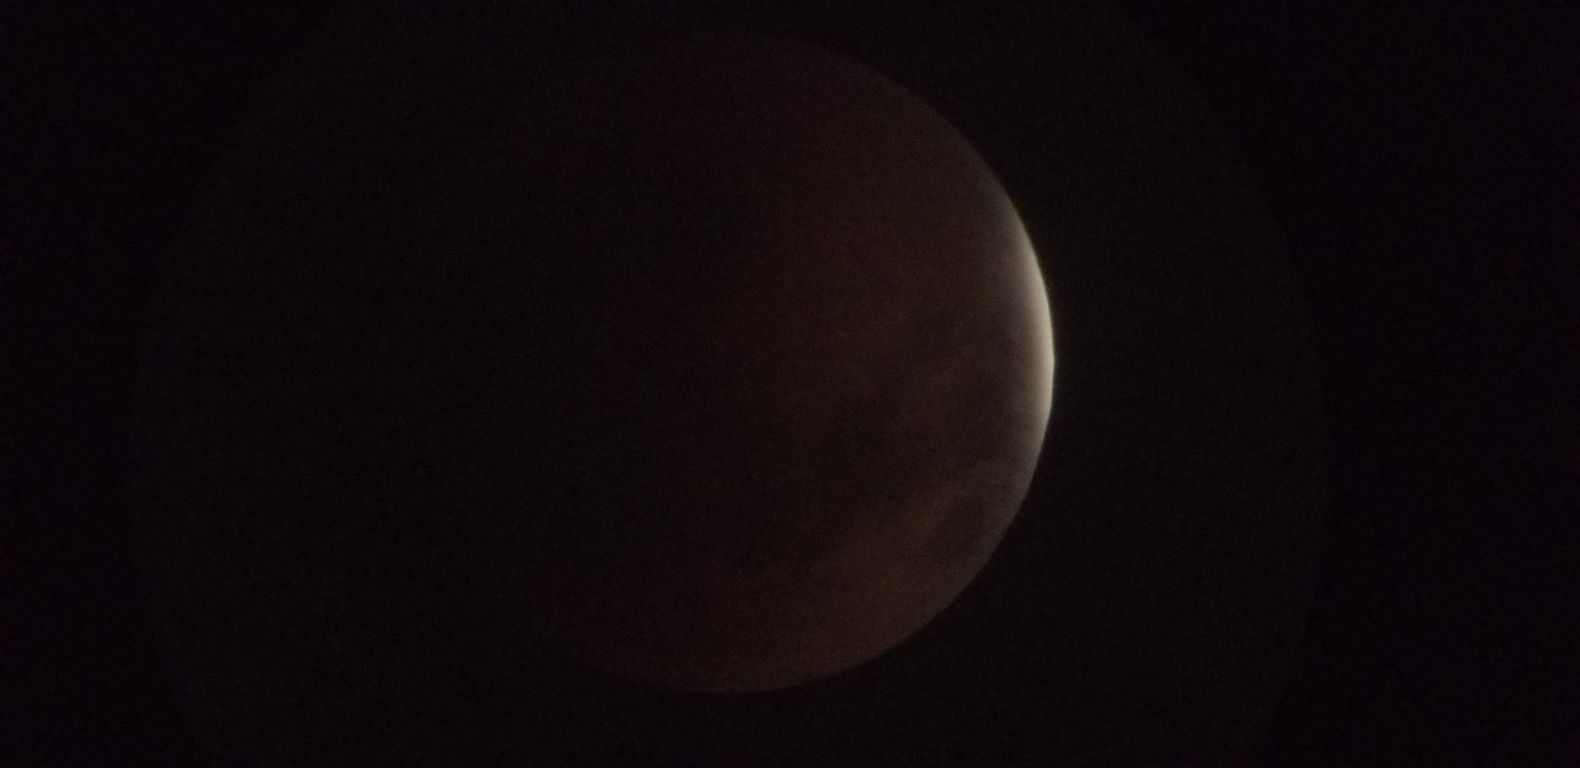 a photo of the progress of a lunar eclipse taken may 16th 2022